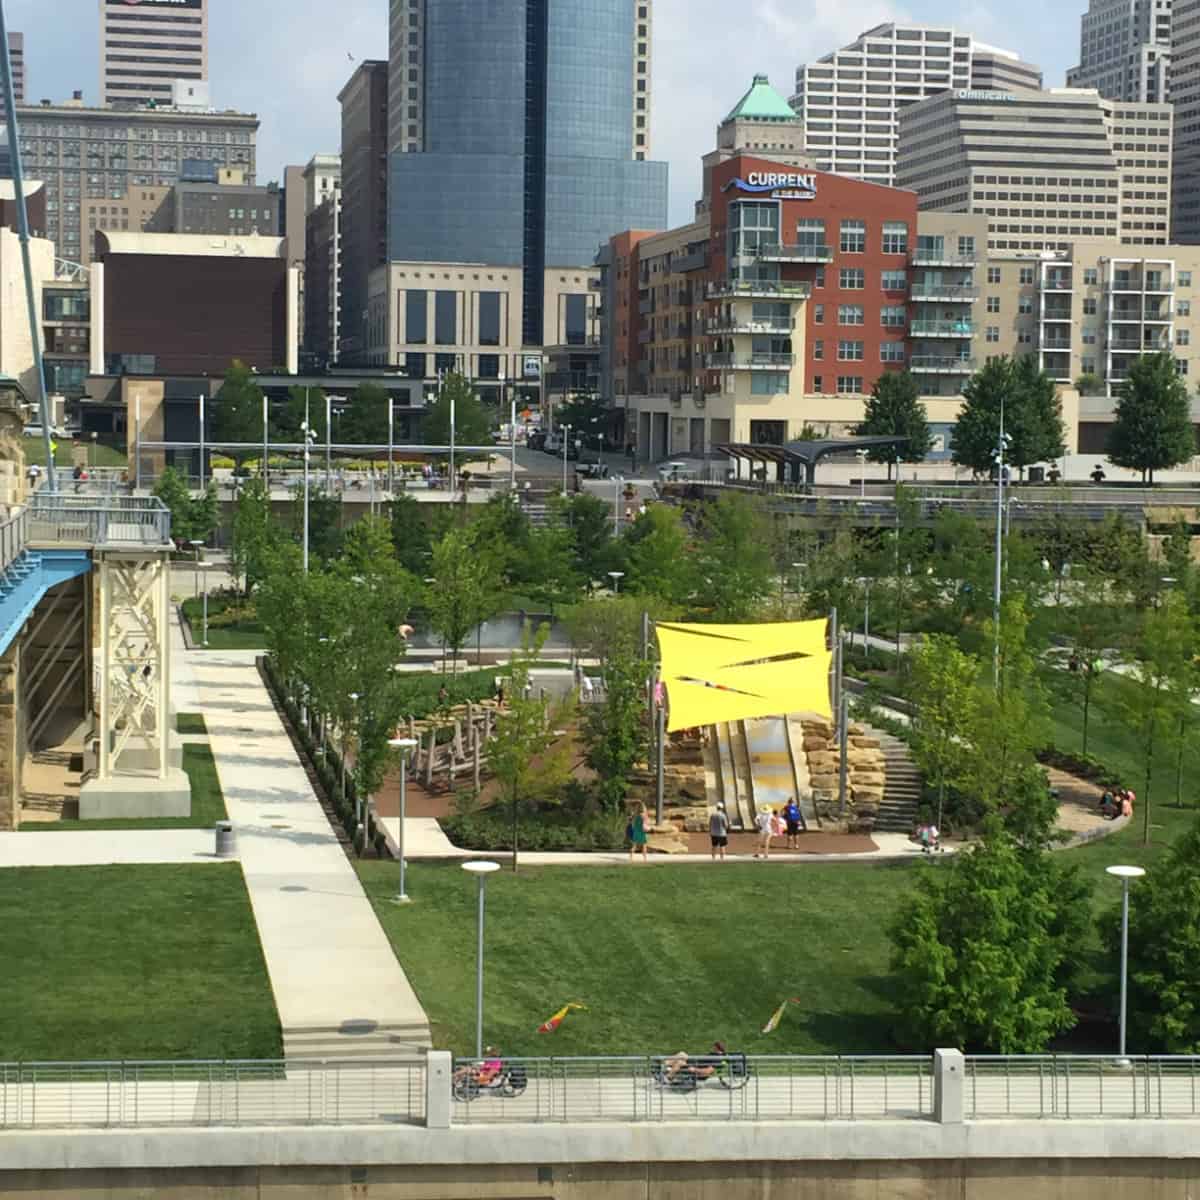 Overview of the playground and city skyline in Cincinnati